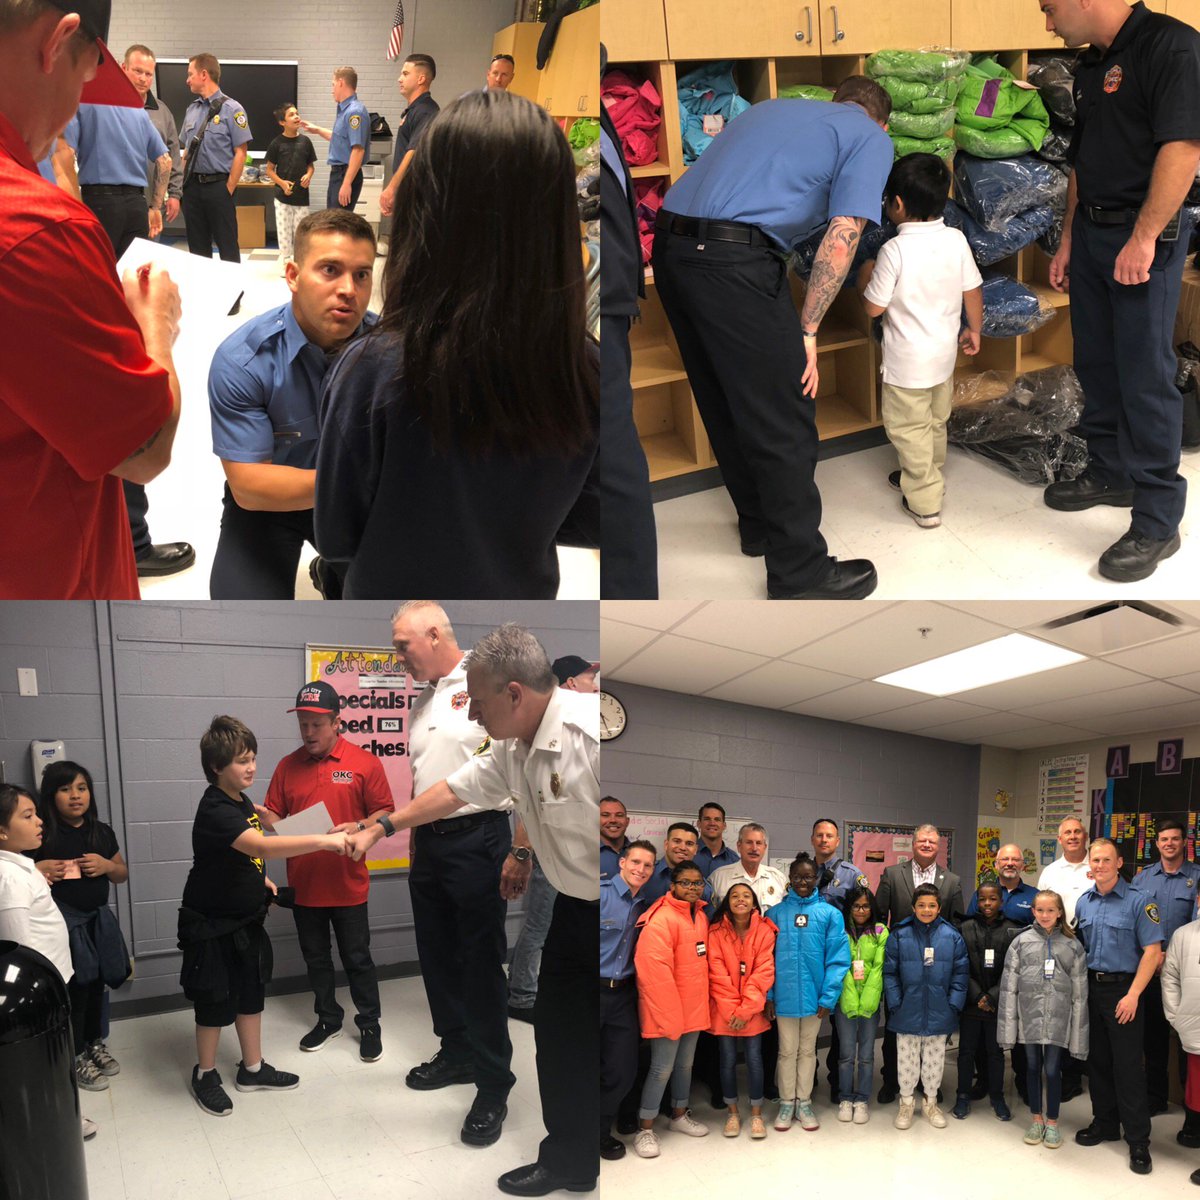 Special delivery this morning at @OKCPS Parmelee Elementary. Our recruits and off-duty firefighters helped fit students with a new winter coat! Special thanks to Councilman Stone and @HudiburgAuto for their support!